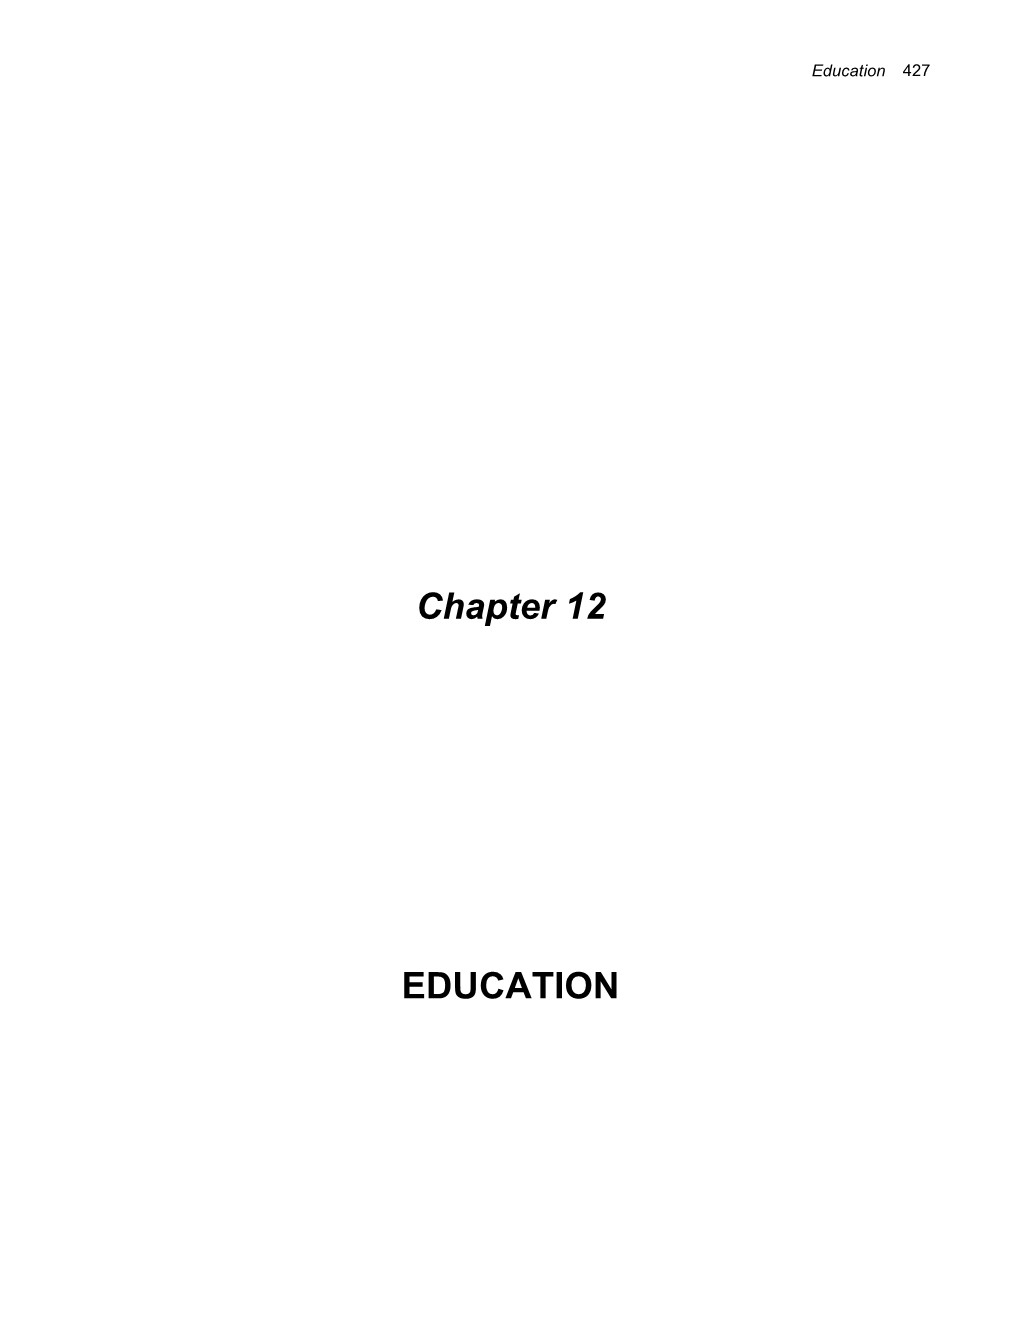 Chapter 12 EDUCATION